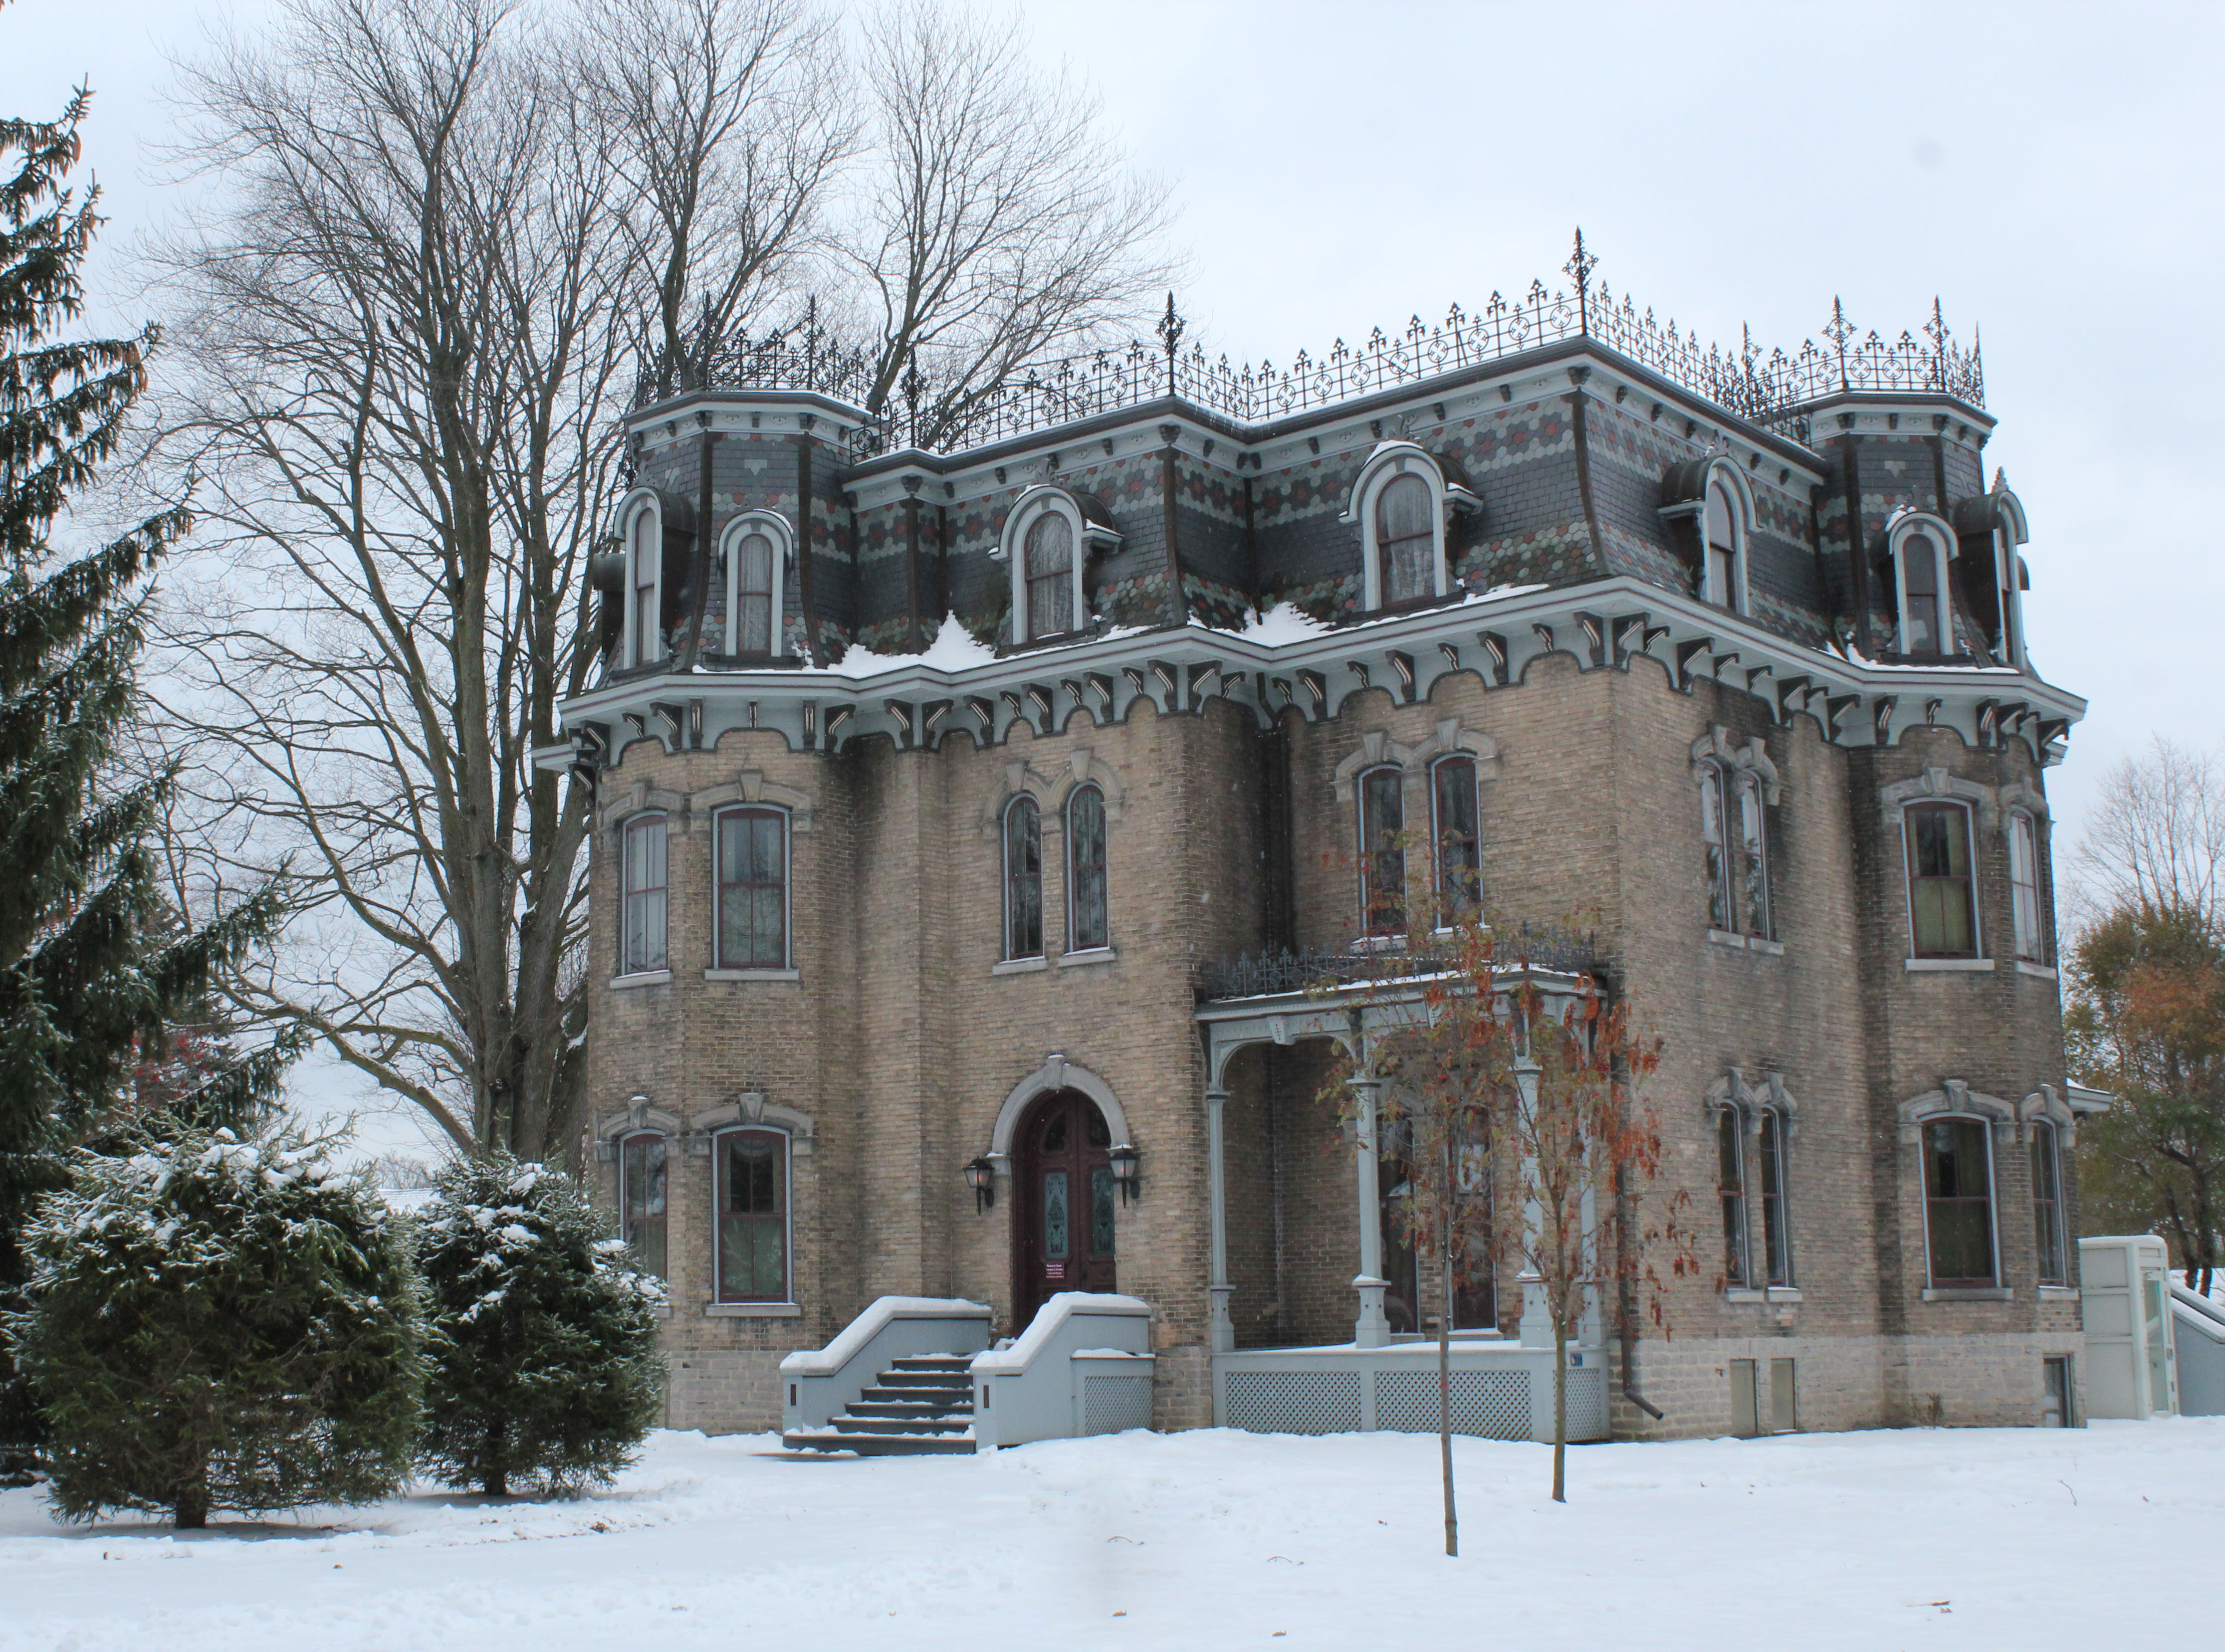 Glanmore National Historic Site exterior in winter